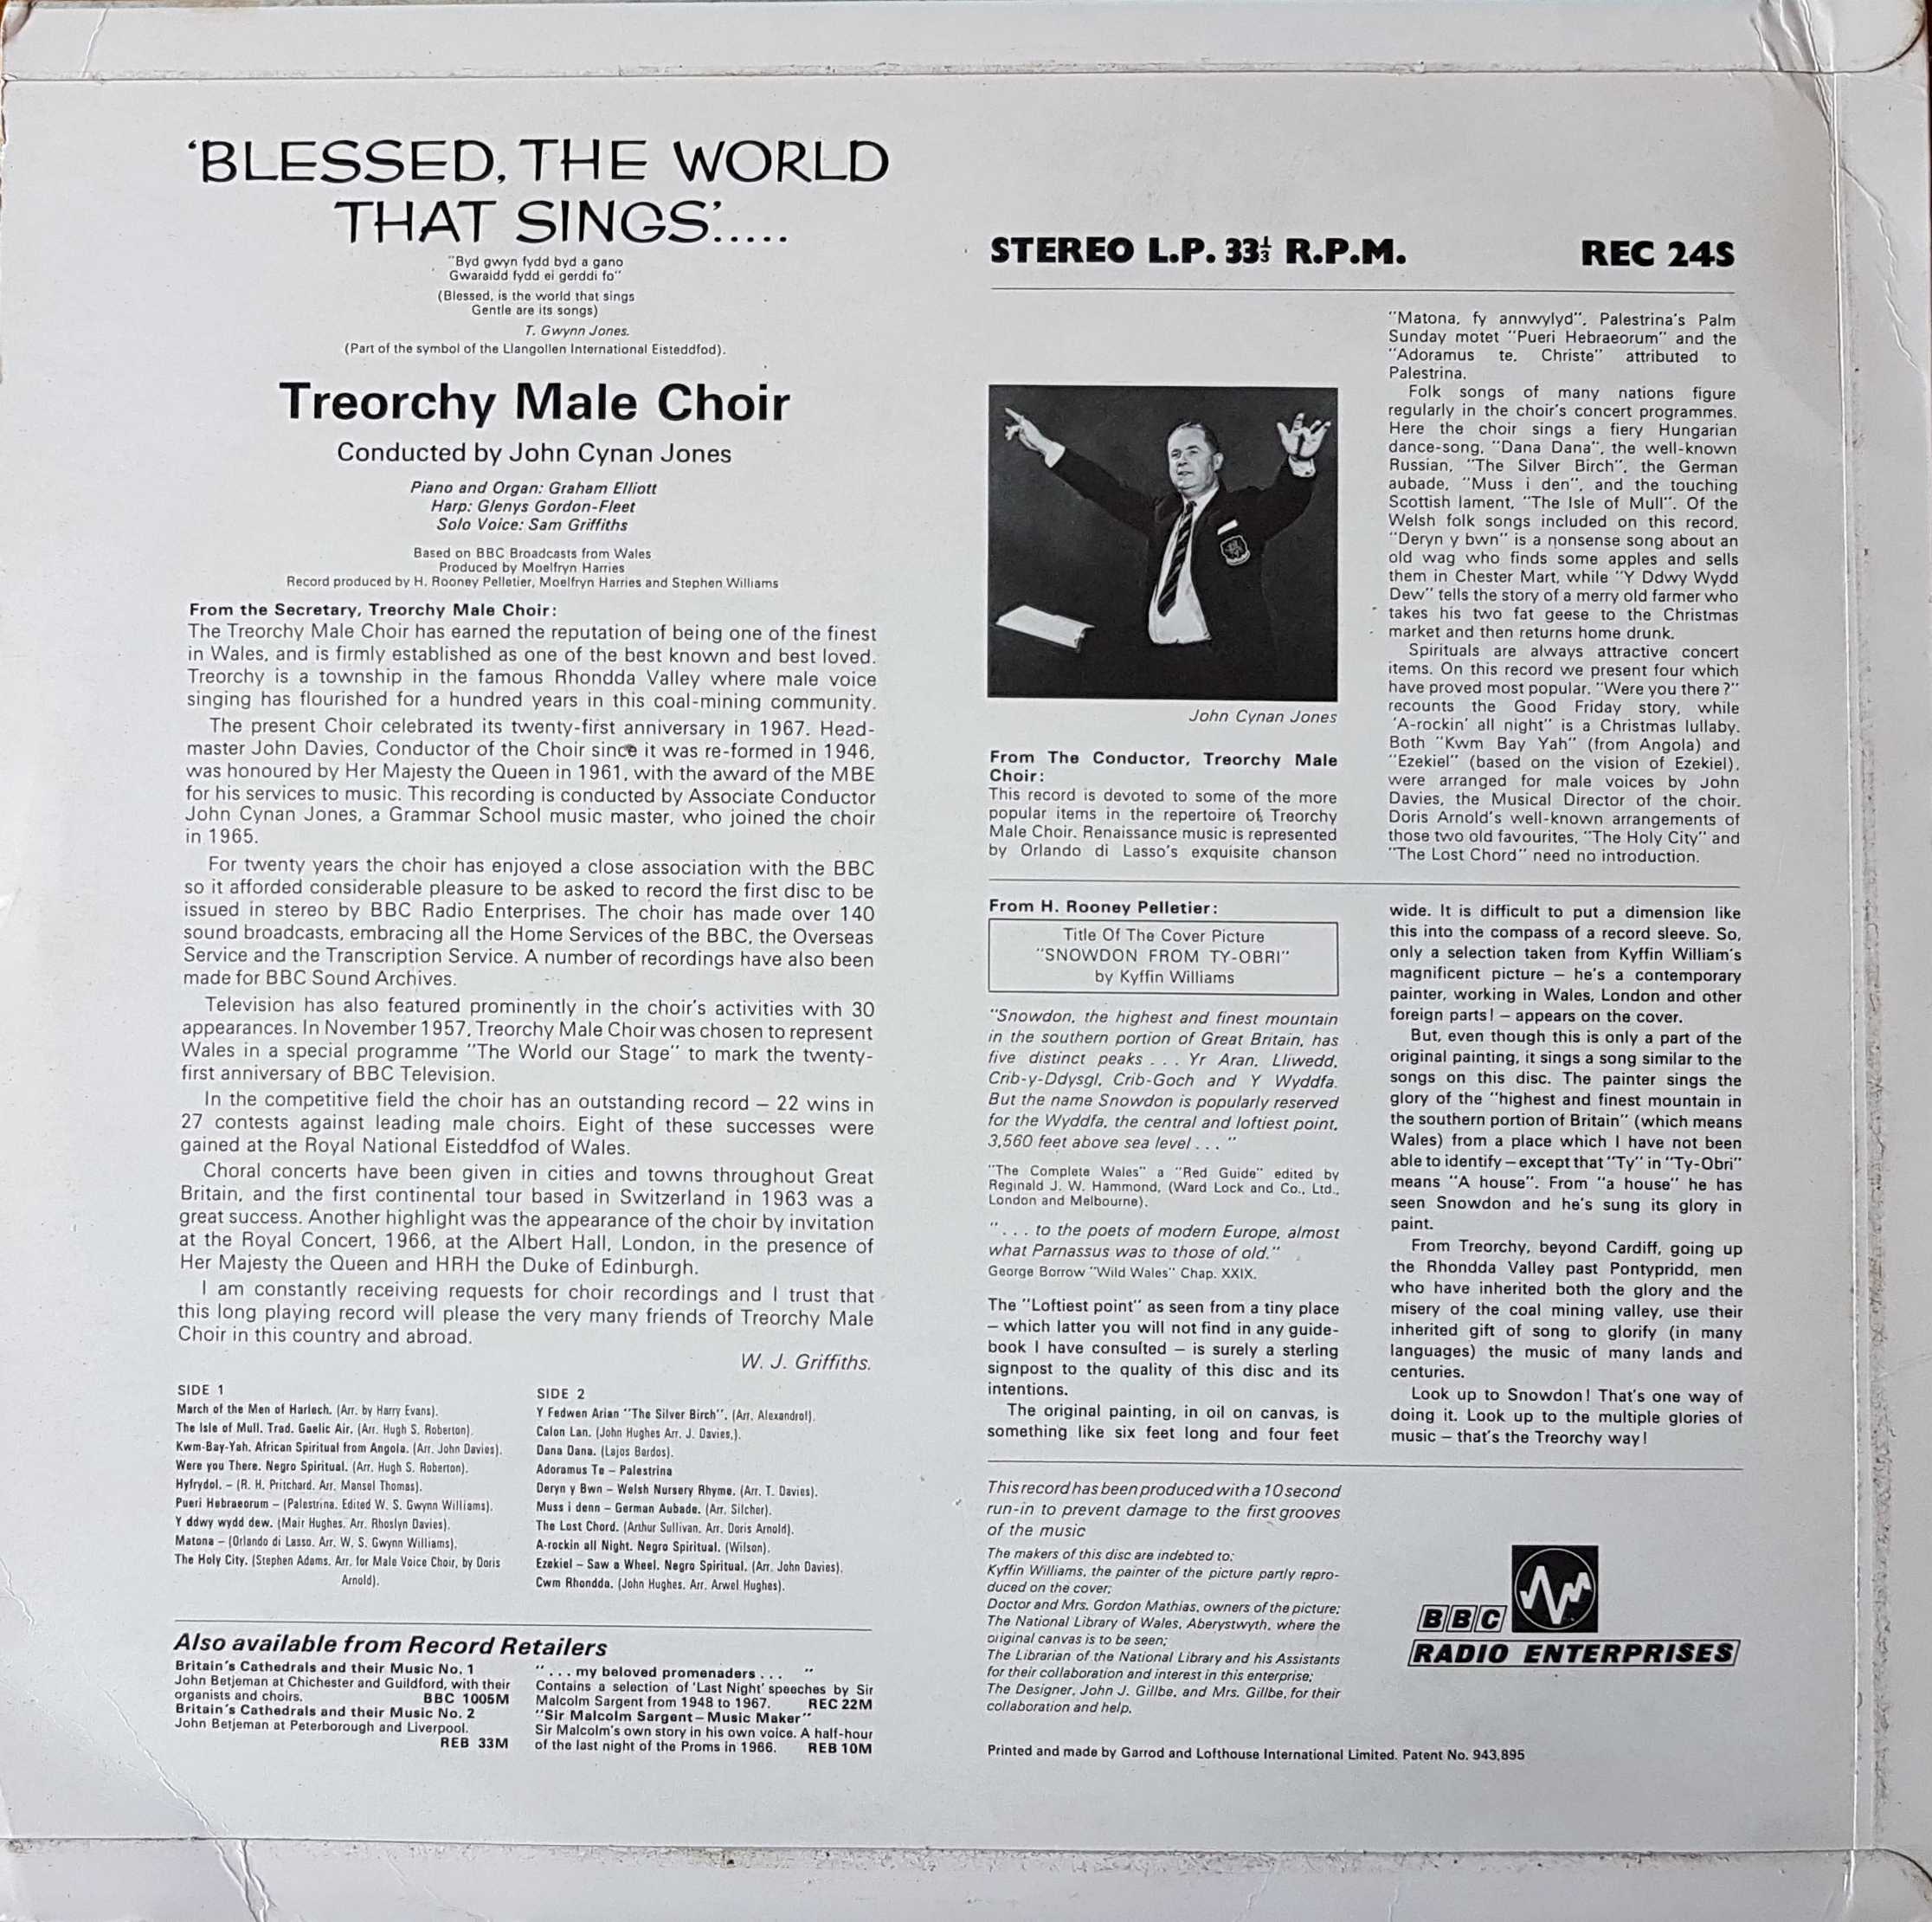 Picture of REC 24 Blessed, the World that sings by artist Theorchy male Welsh choir from the BBC records and Tapes library